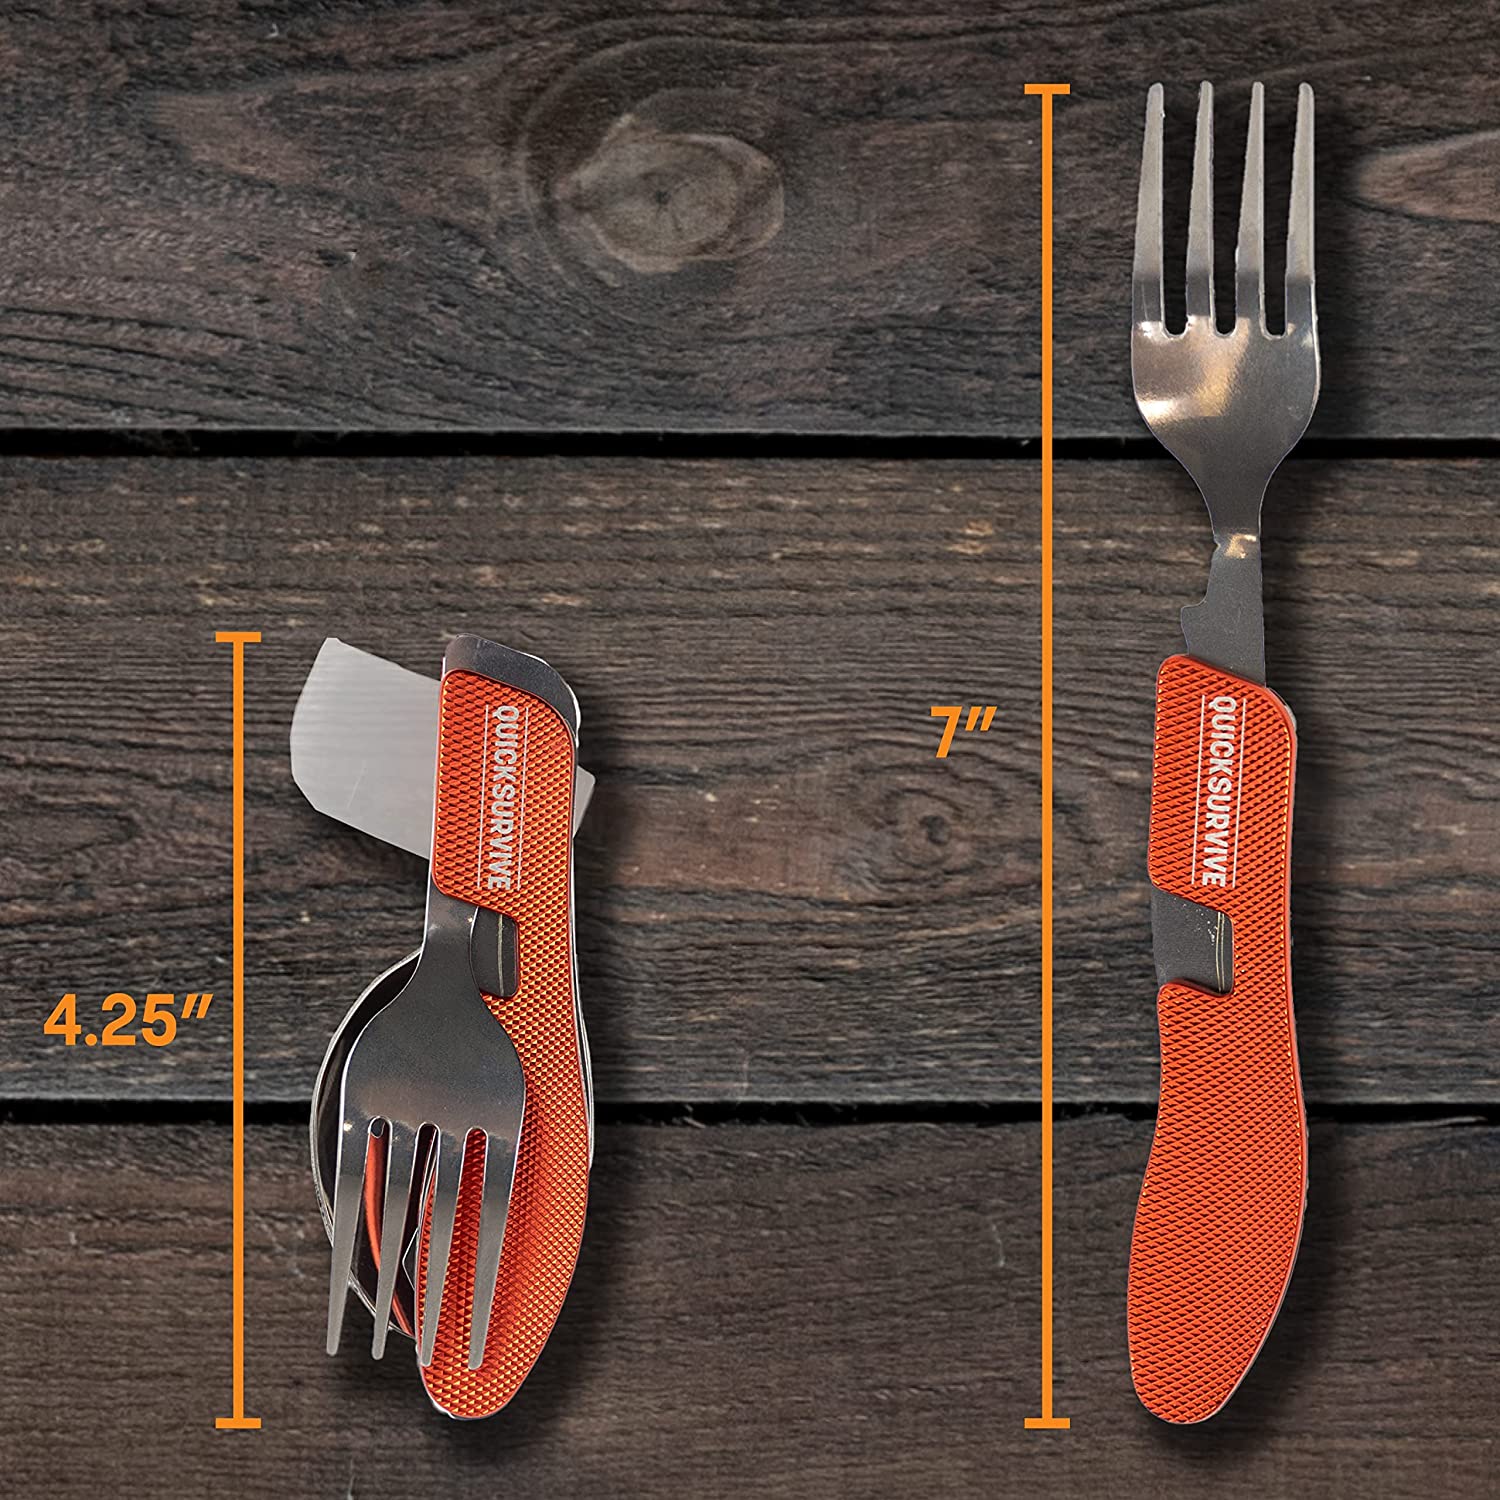 4-in-1 Pocket Camping Utensil Tool Stainless Steel Fork, Knife, Spoon, Bottle Opener by Quick Survive